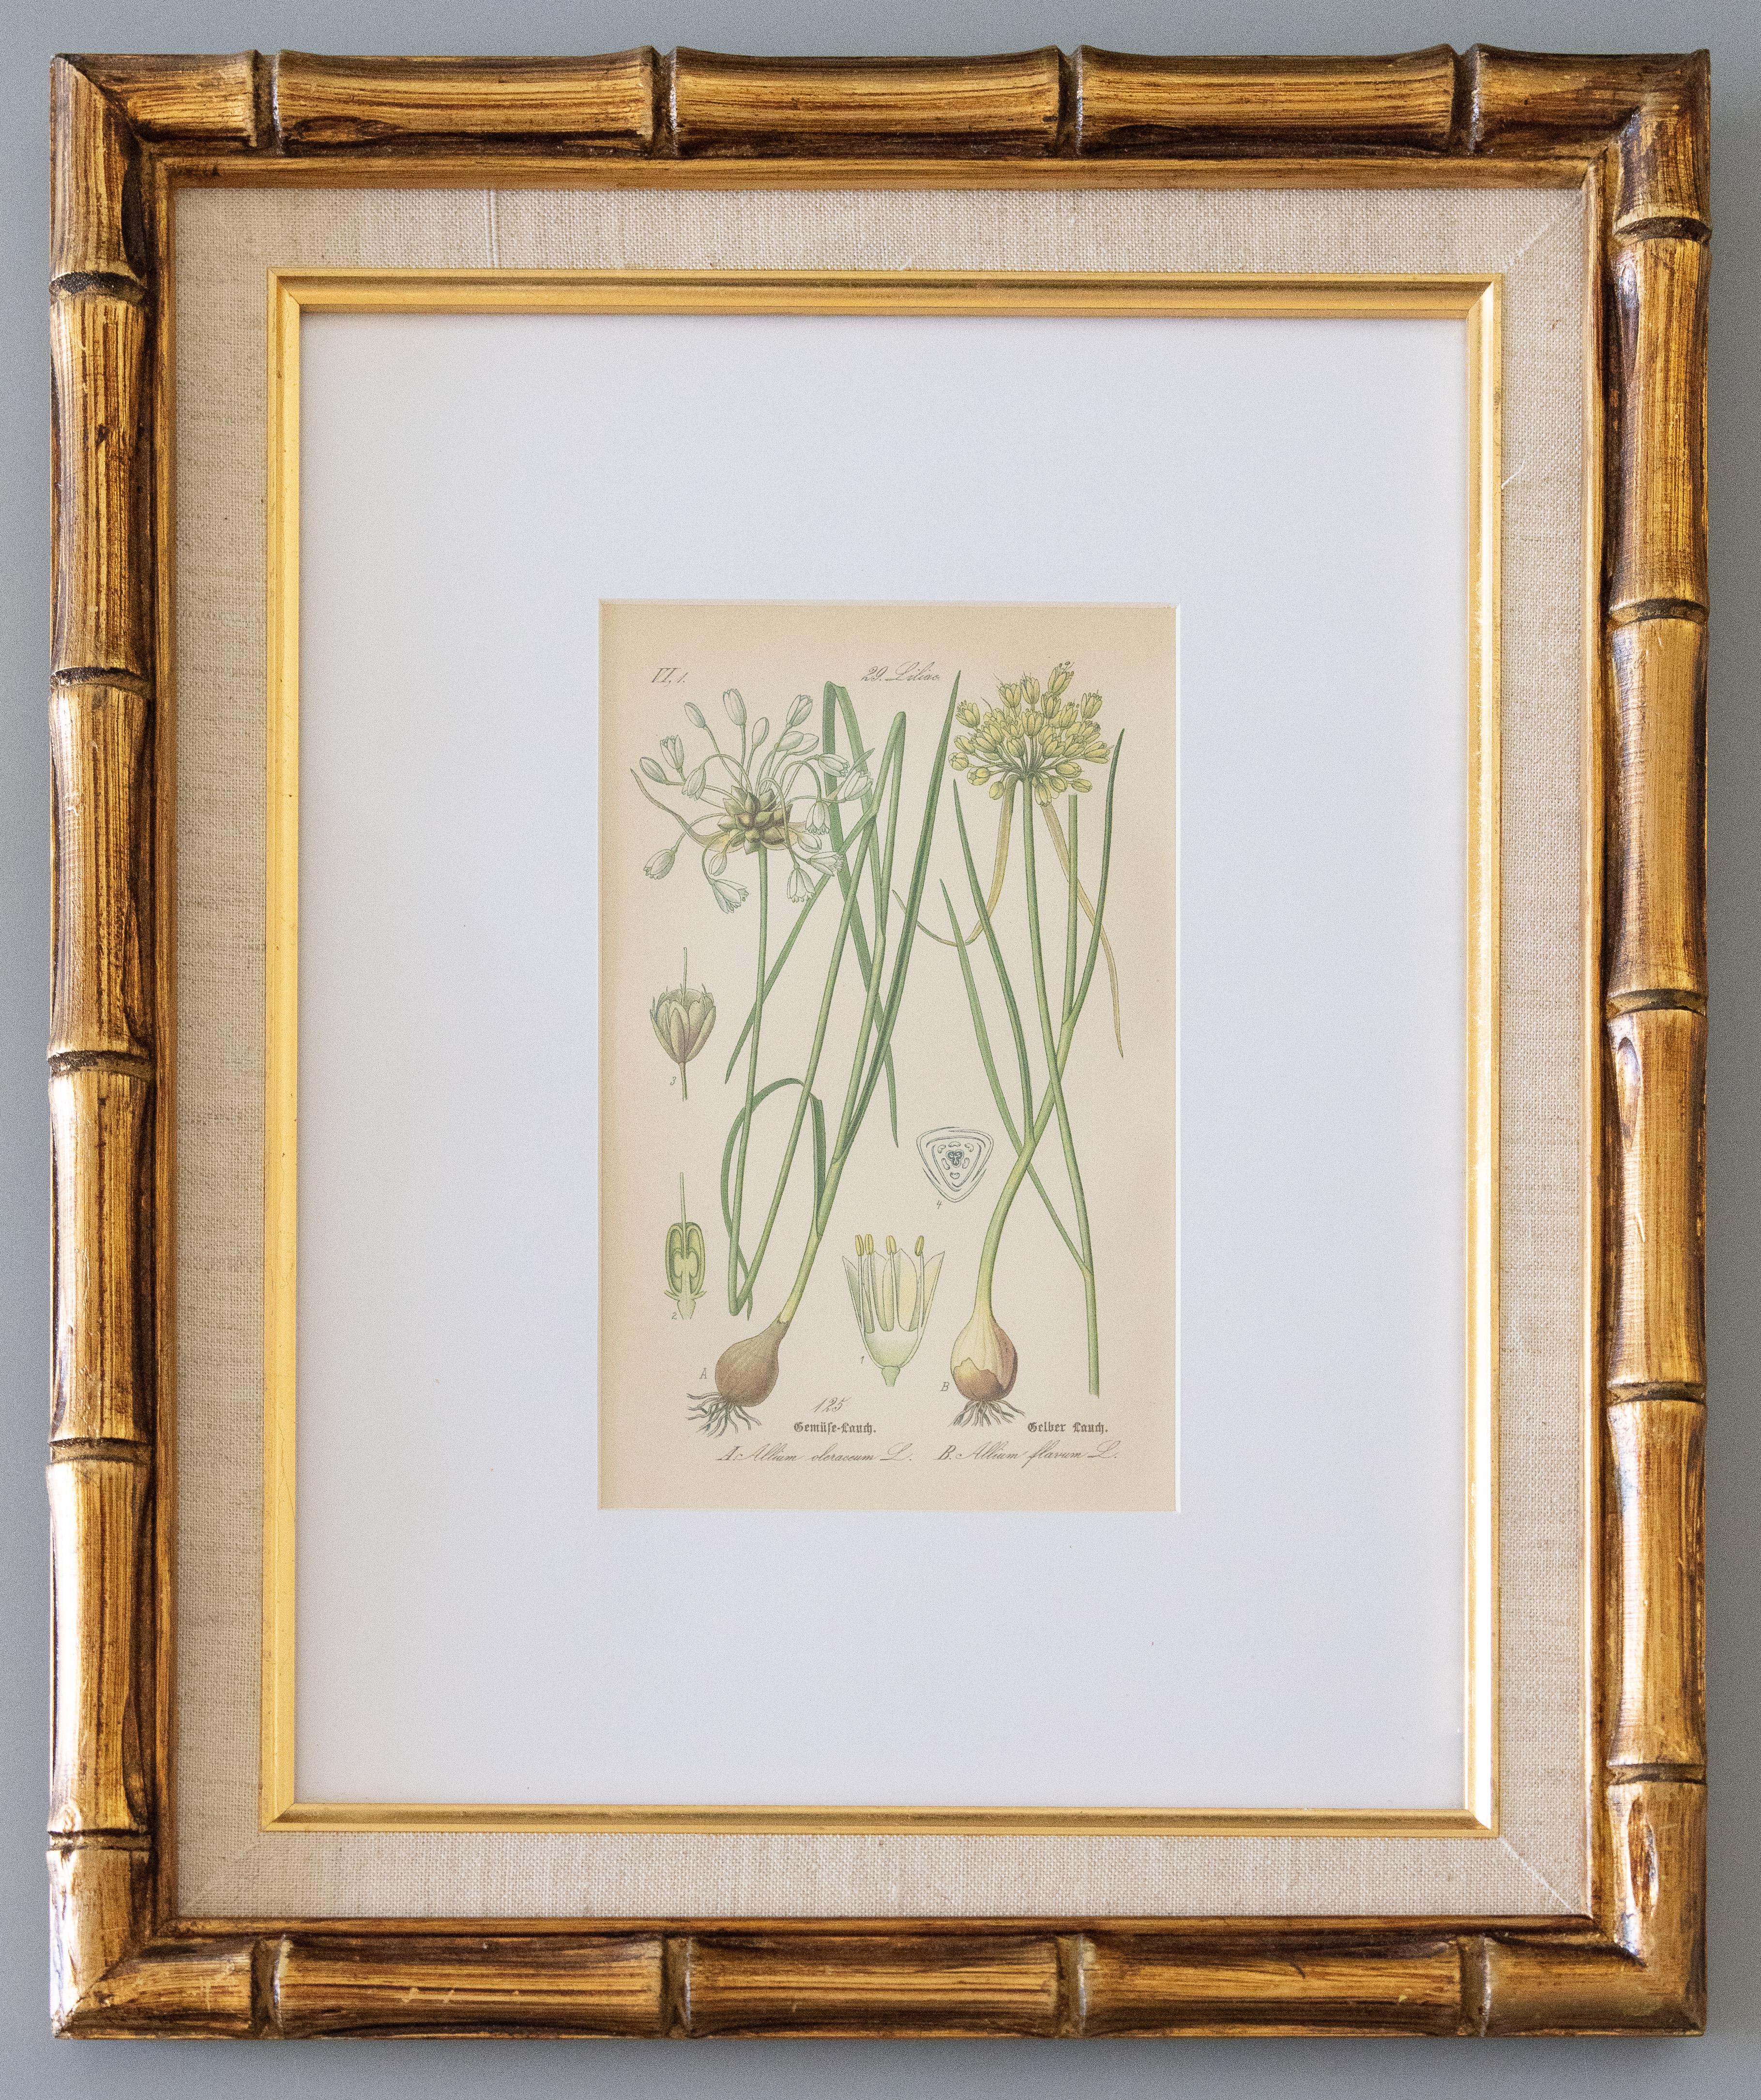 Vibrant custom framed 19th century floral botanical engravings from Prof. Dr. Otto Wilhelm Thome's 